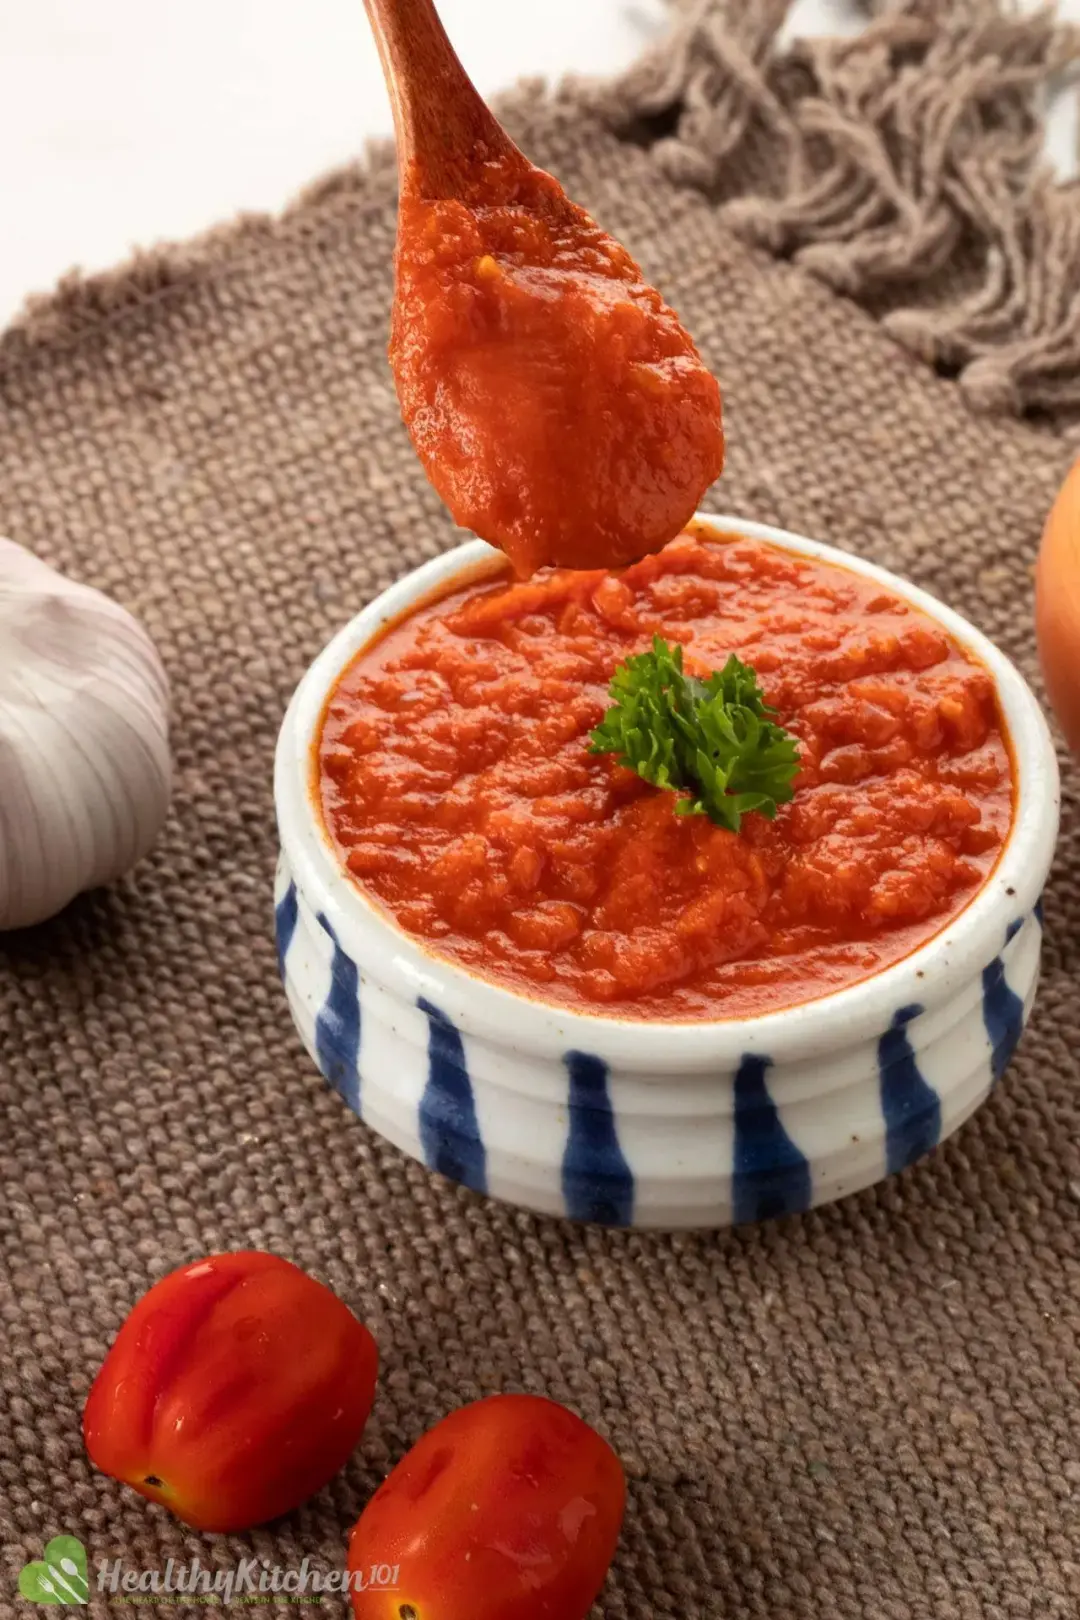 How Do You Adjust the Texture of Tomato Sauce